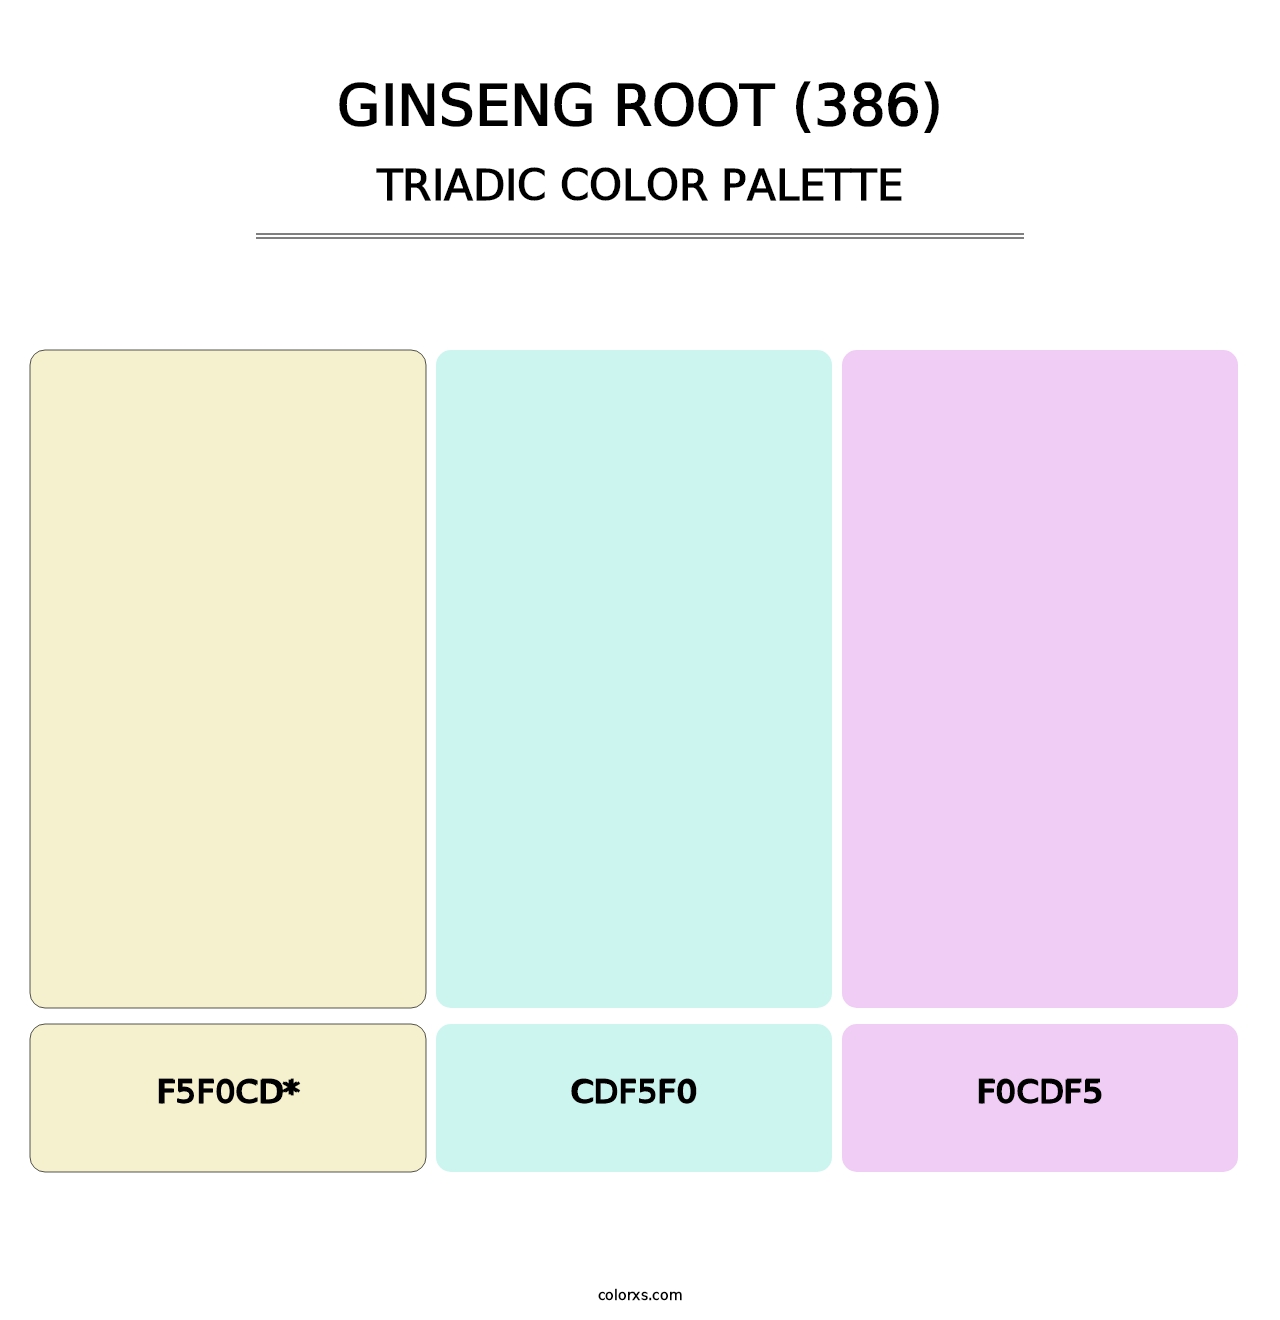 Ginseng Root (386) - Triadic Color Palette